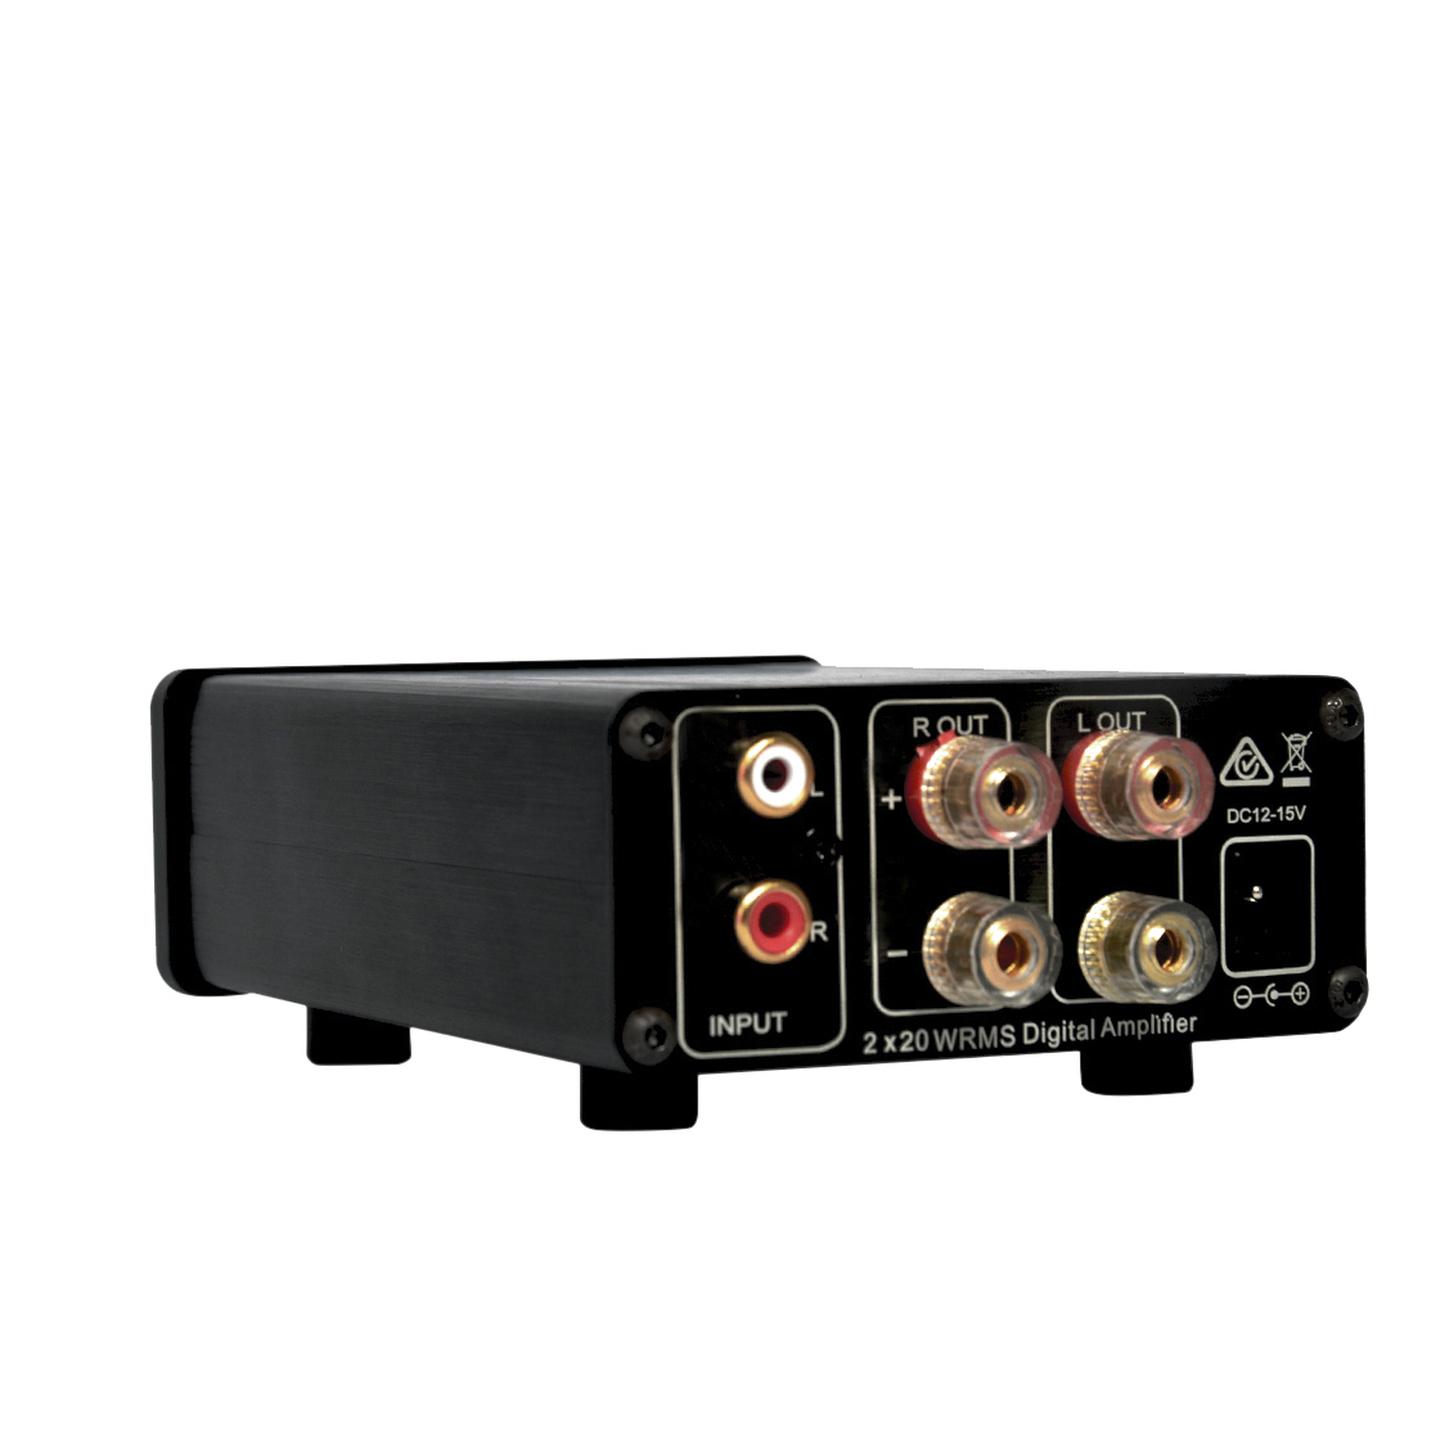 Compact 2 x 20WRMS Stereo Amplifier